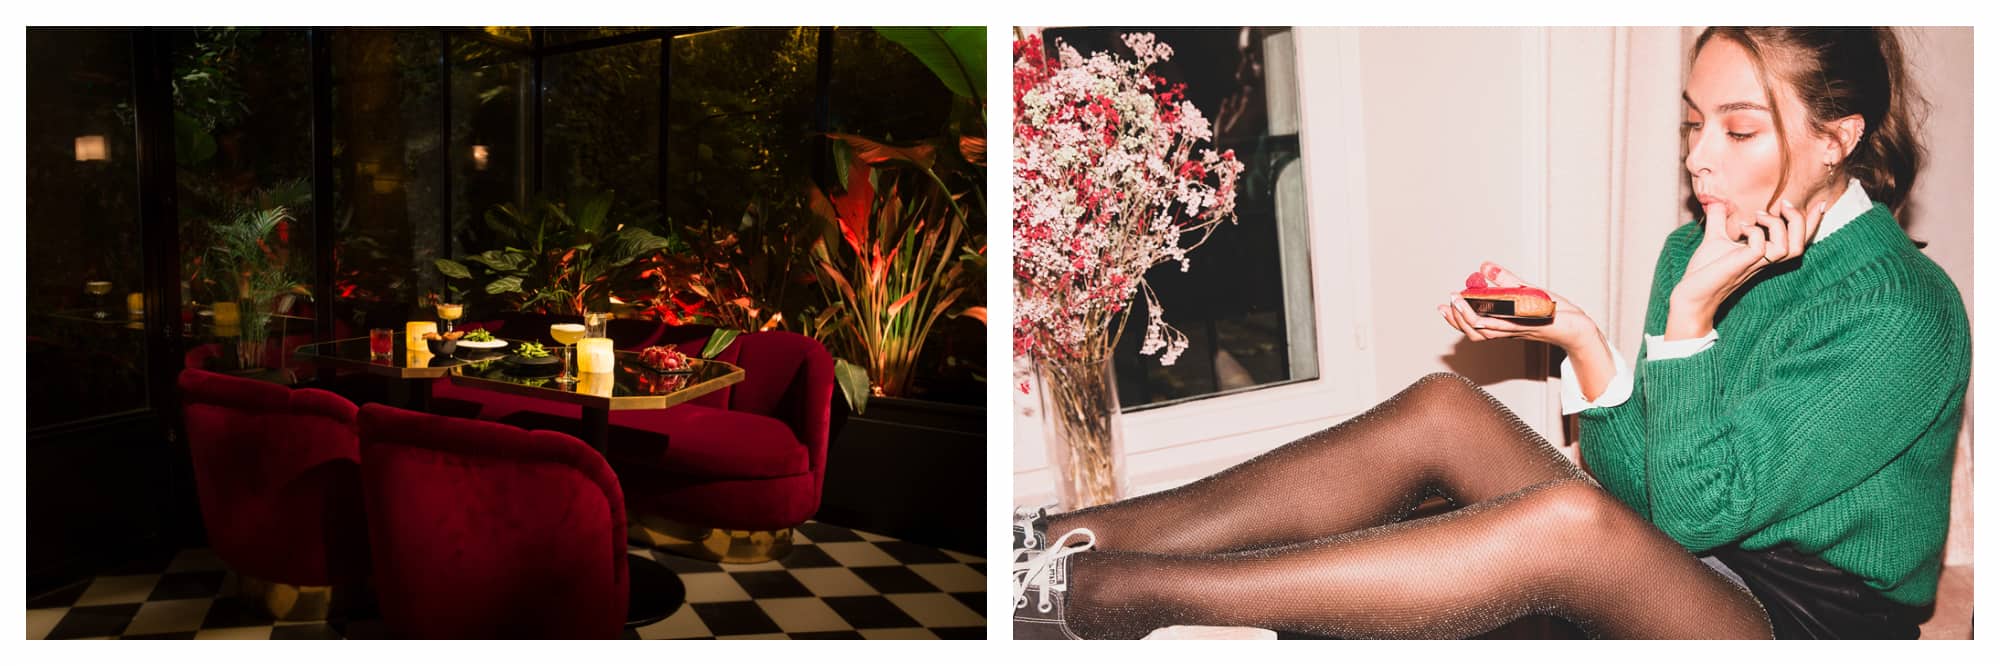 The interior of a conservatory bar at night, red velvet seats, black and white tiled floor, plants outside the glass windows and cocktails on the table (left). A woman with her feet up on a table eating a cake (right).